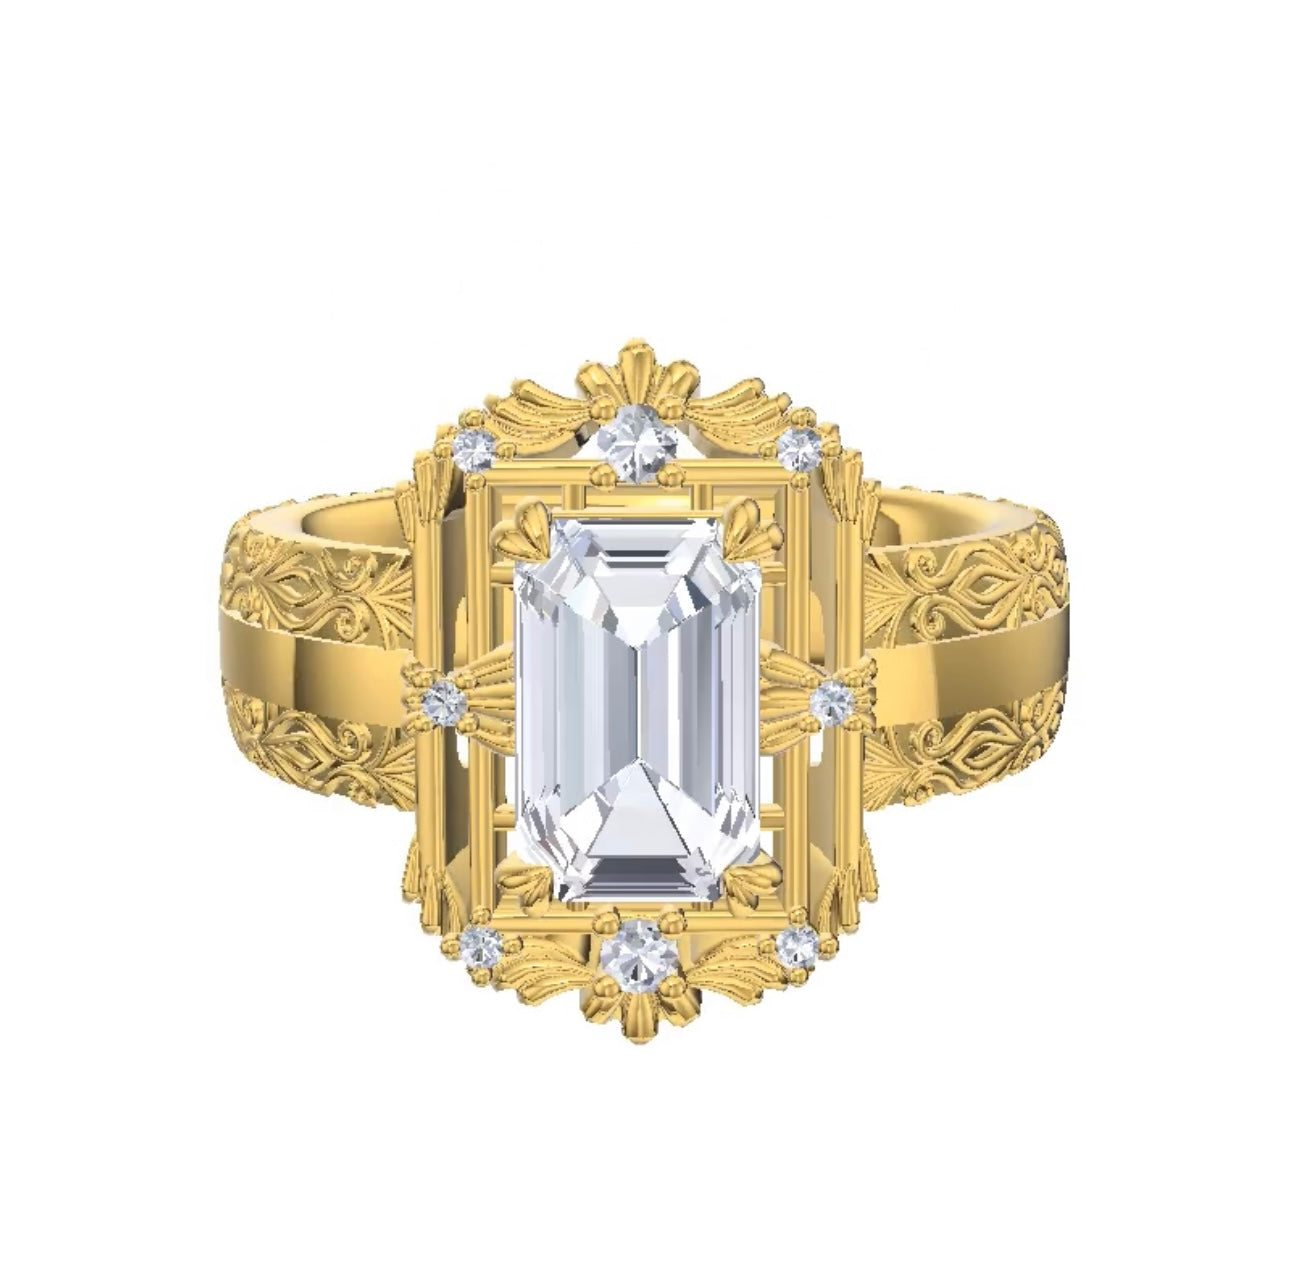 This is a 14kt yellow gold detialed elegant ring with an emerald cut diamond Centerstone and an art deco inspired halo with accent diamonds